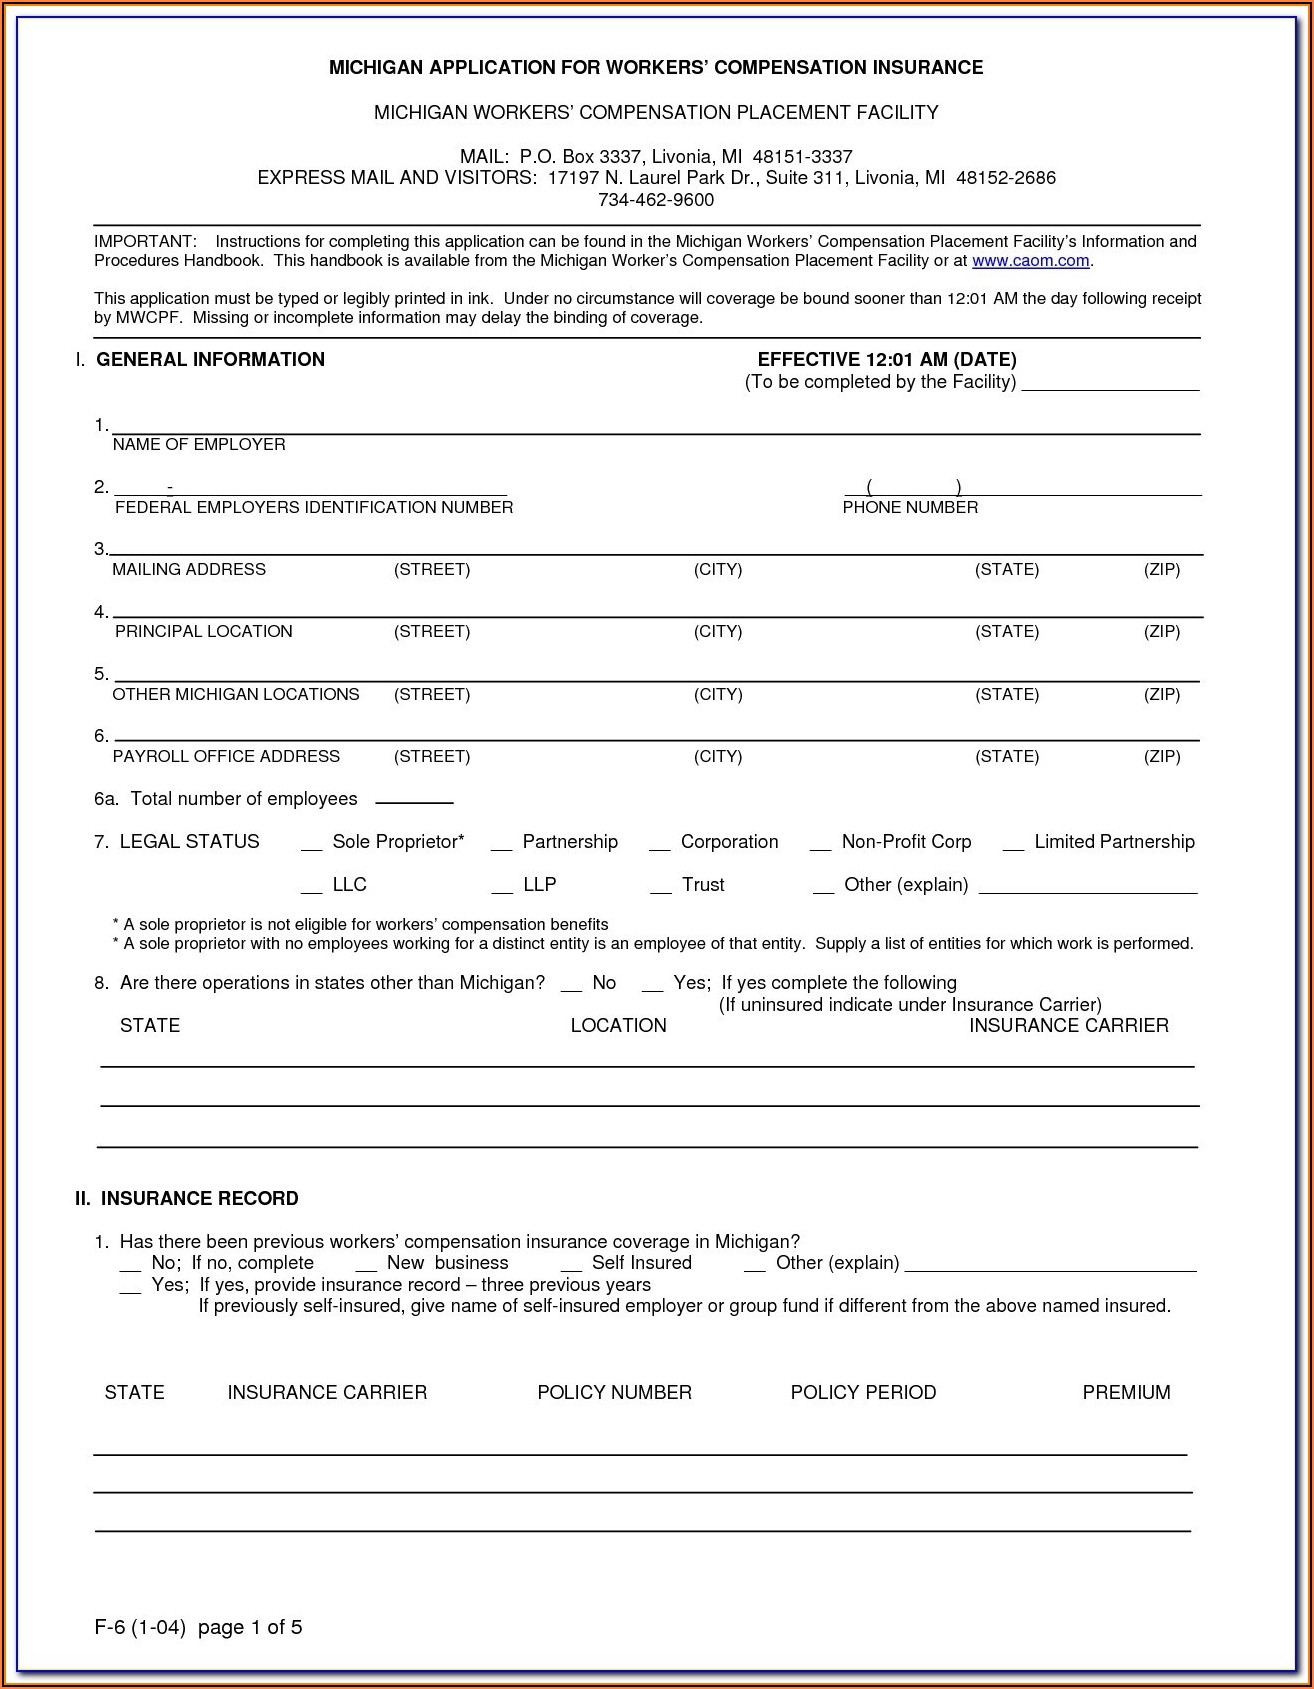 Workers Compensation Form Ce 200 Form Resume Examples 0g27XBq9Pr